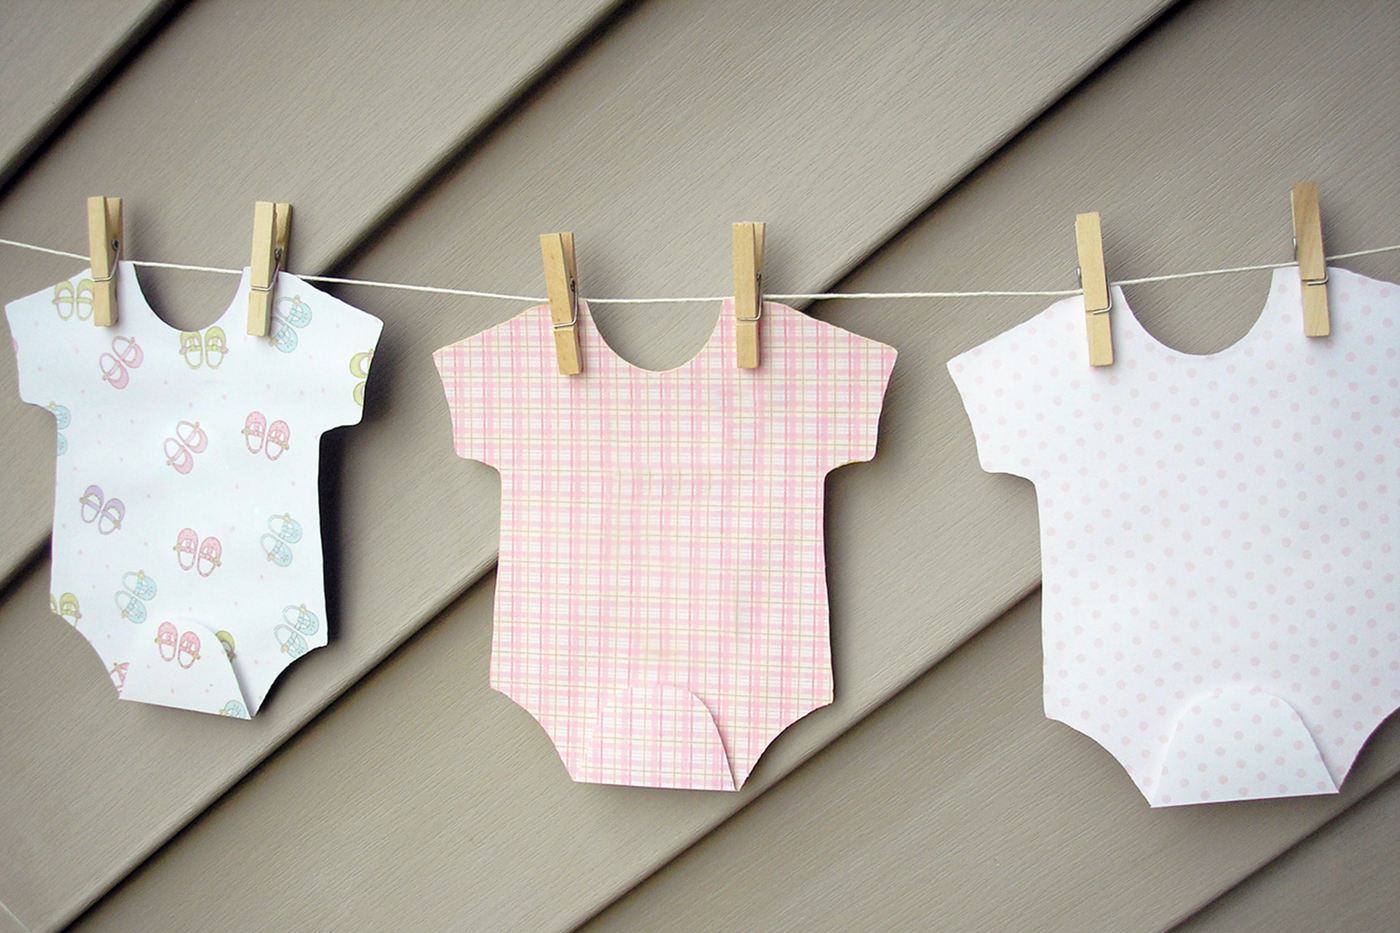 Paper bodysuits in different pastel patterns and colors hanging from a clothesline.